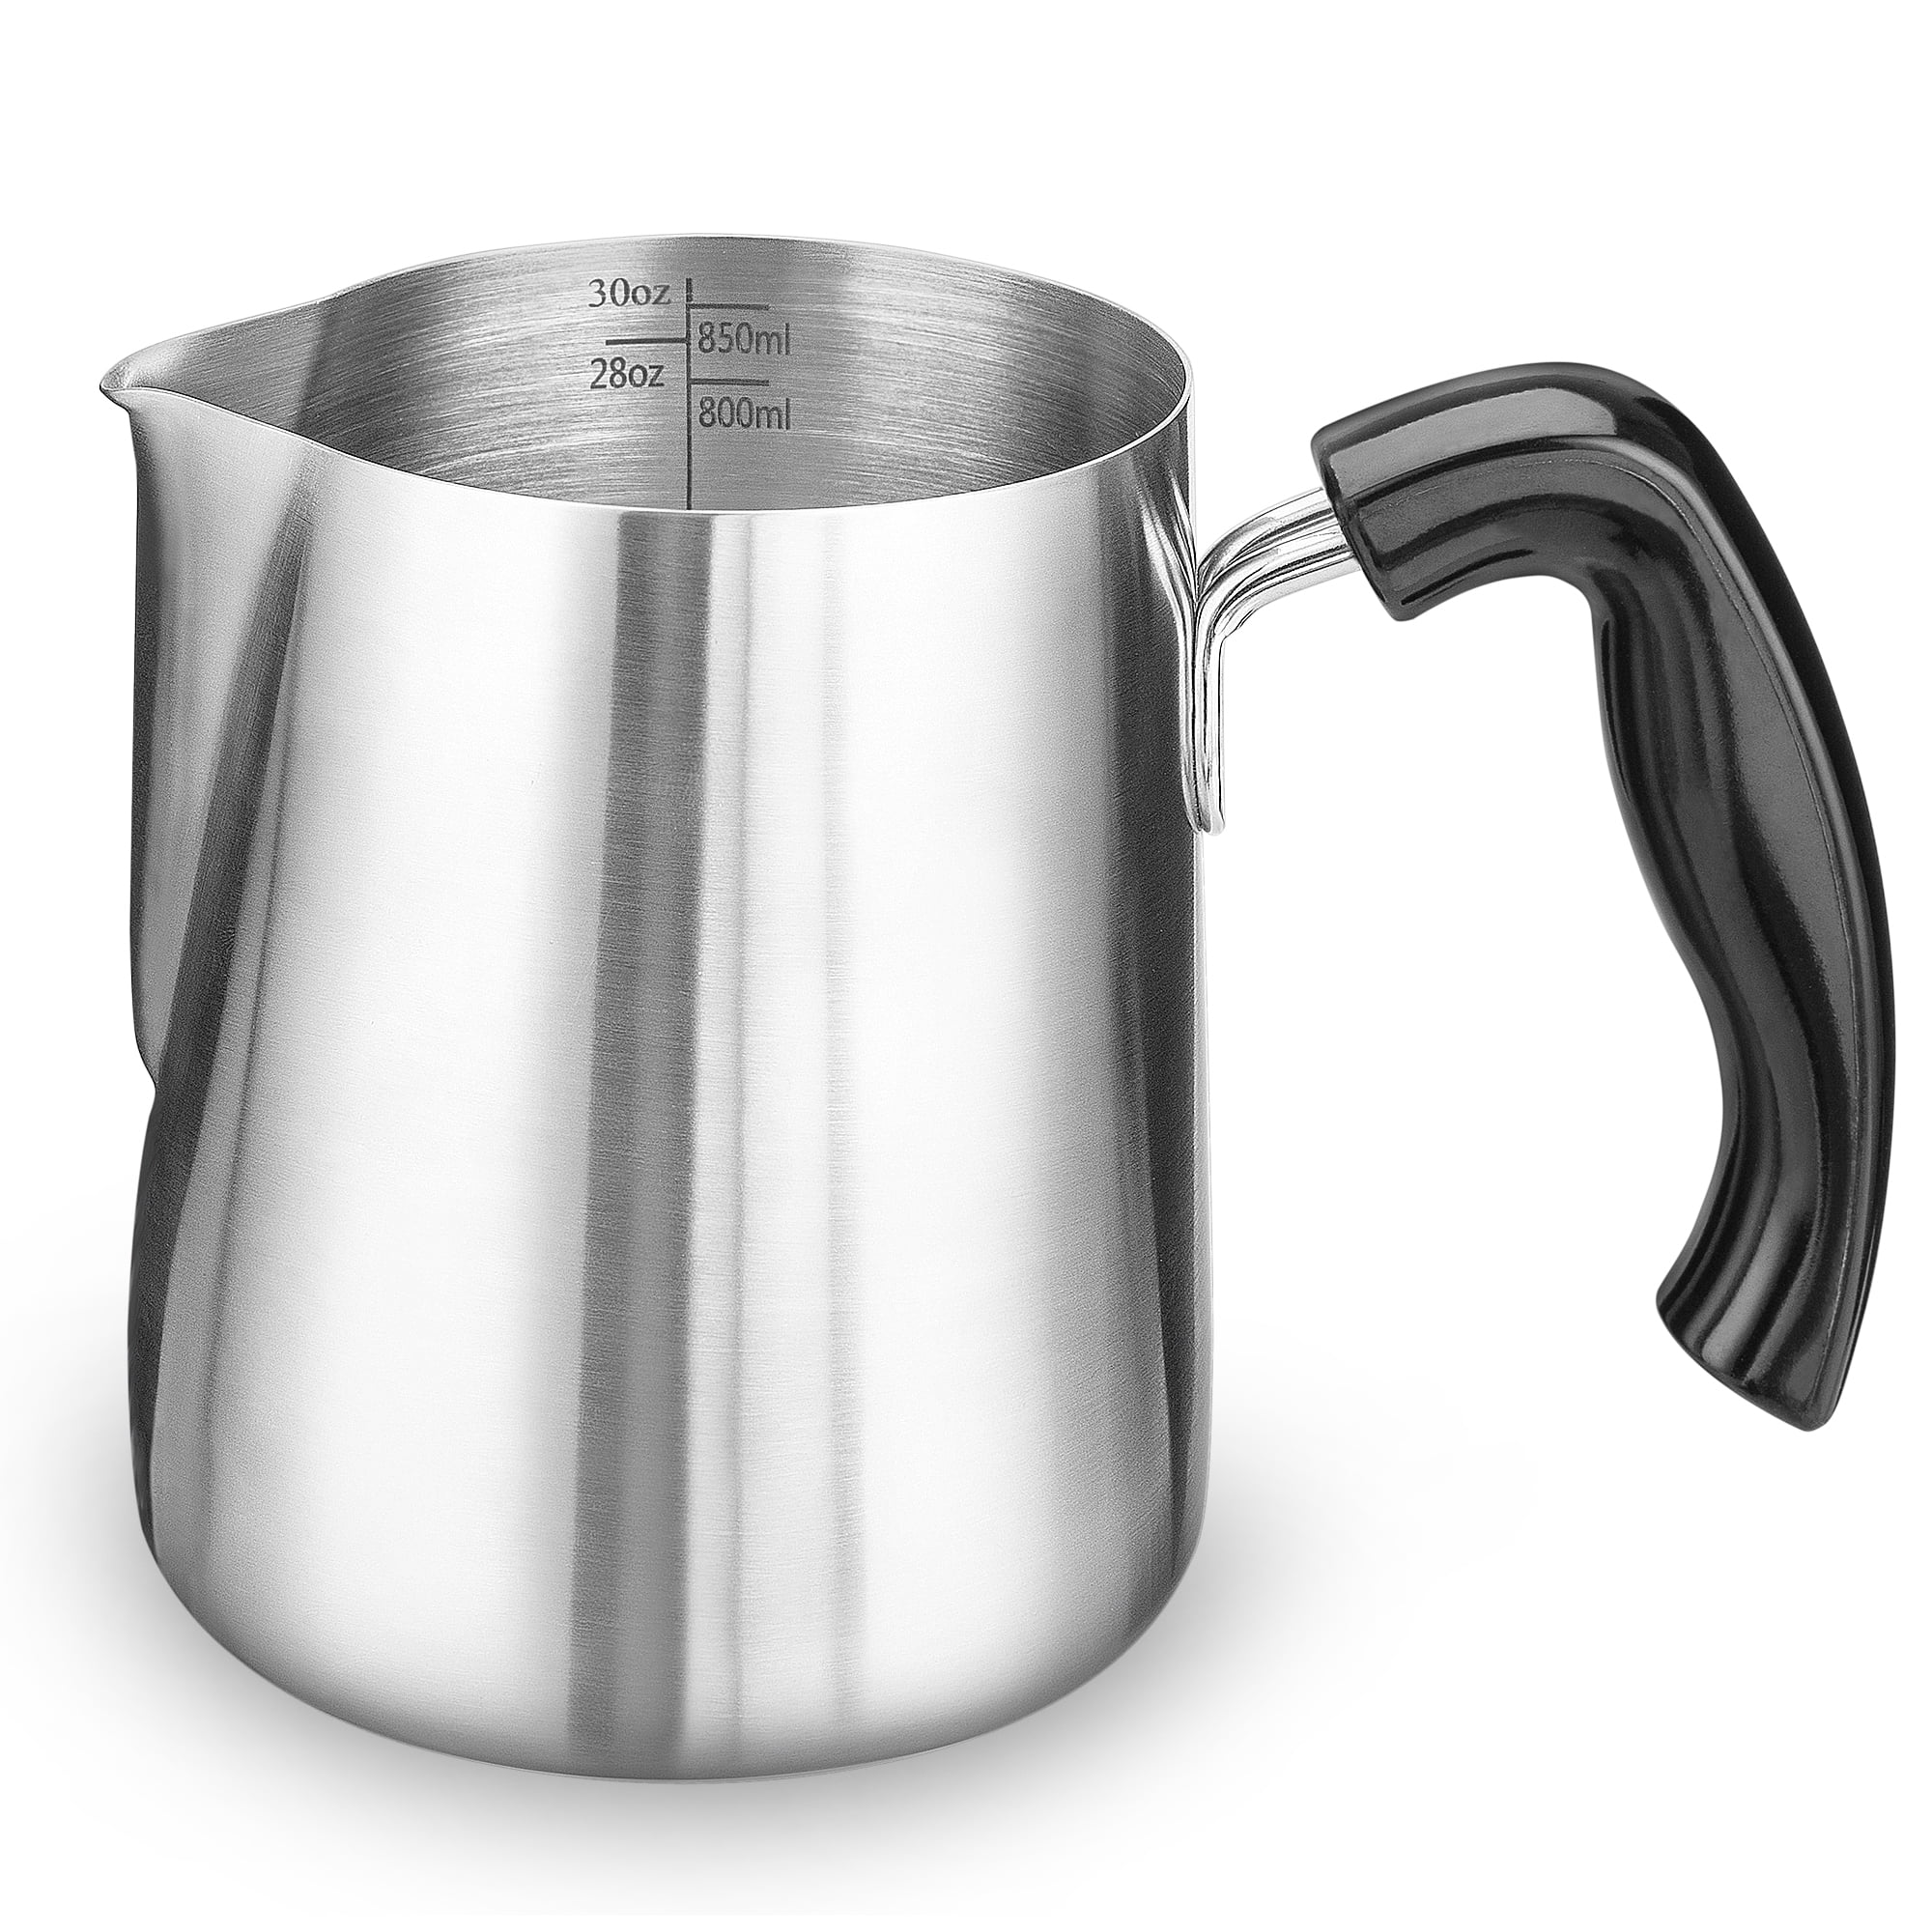 Milk Frother Cup Frothing Pitcher: KitchenBoss Stainless Steel Espresso Steaming Pitcher 12 oz (350ml), Latte Art Pitcher Metal Milk Steamer Jug